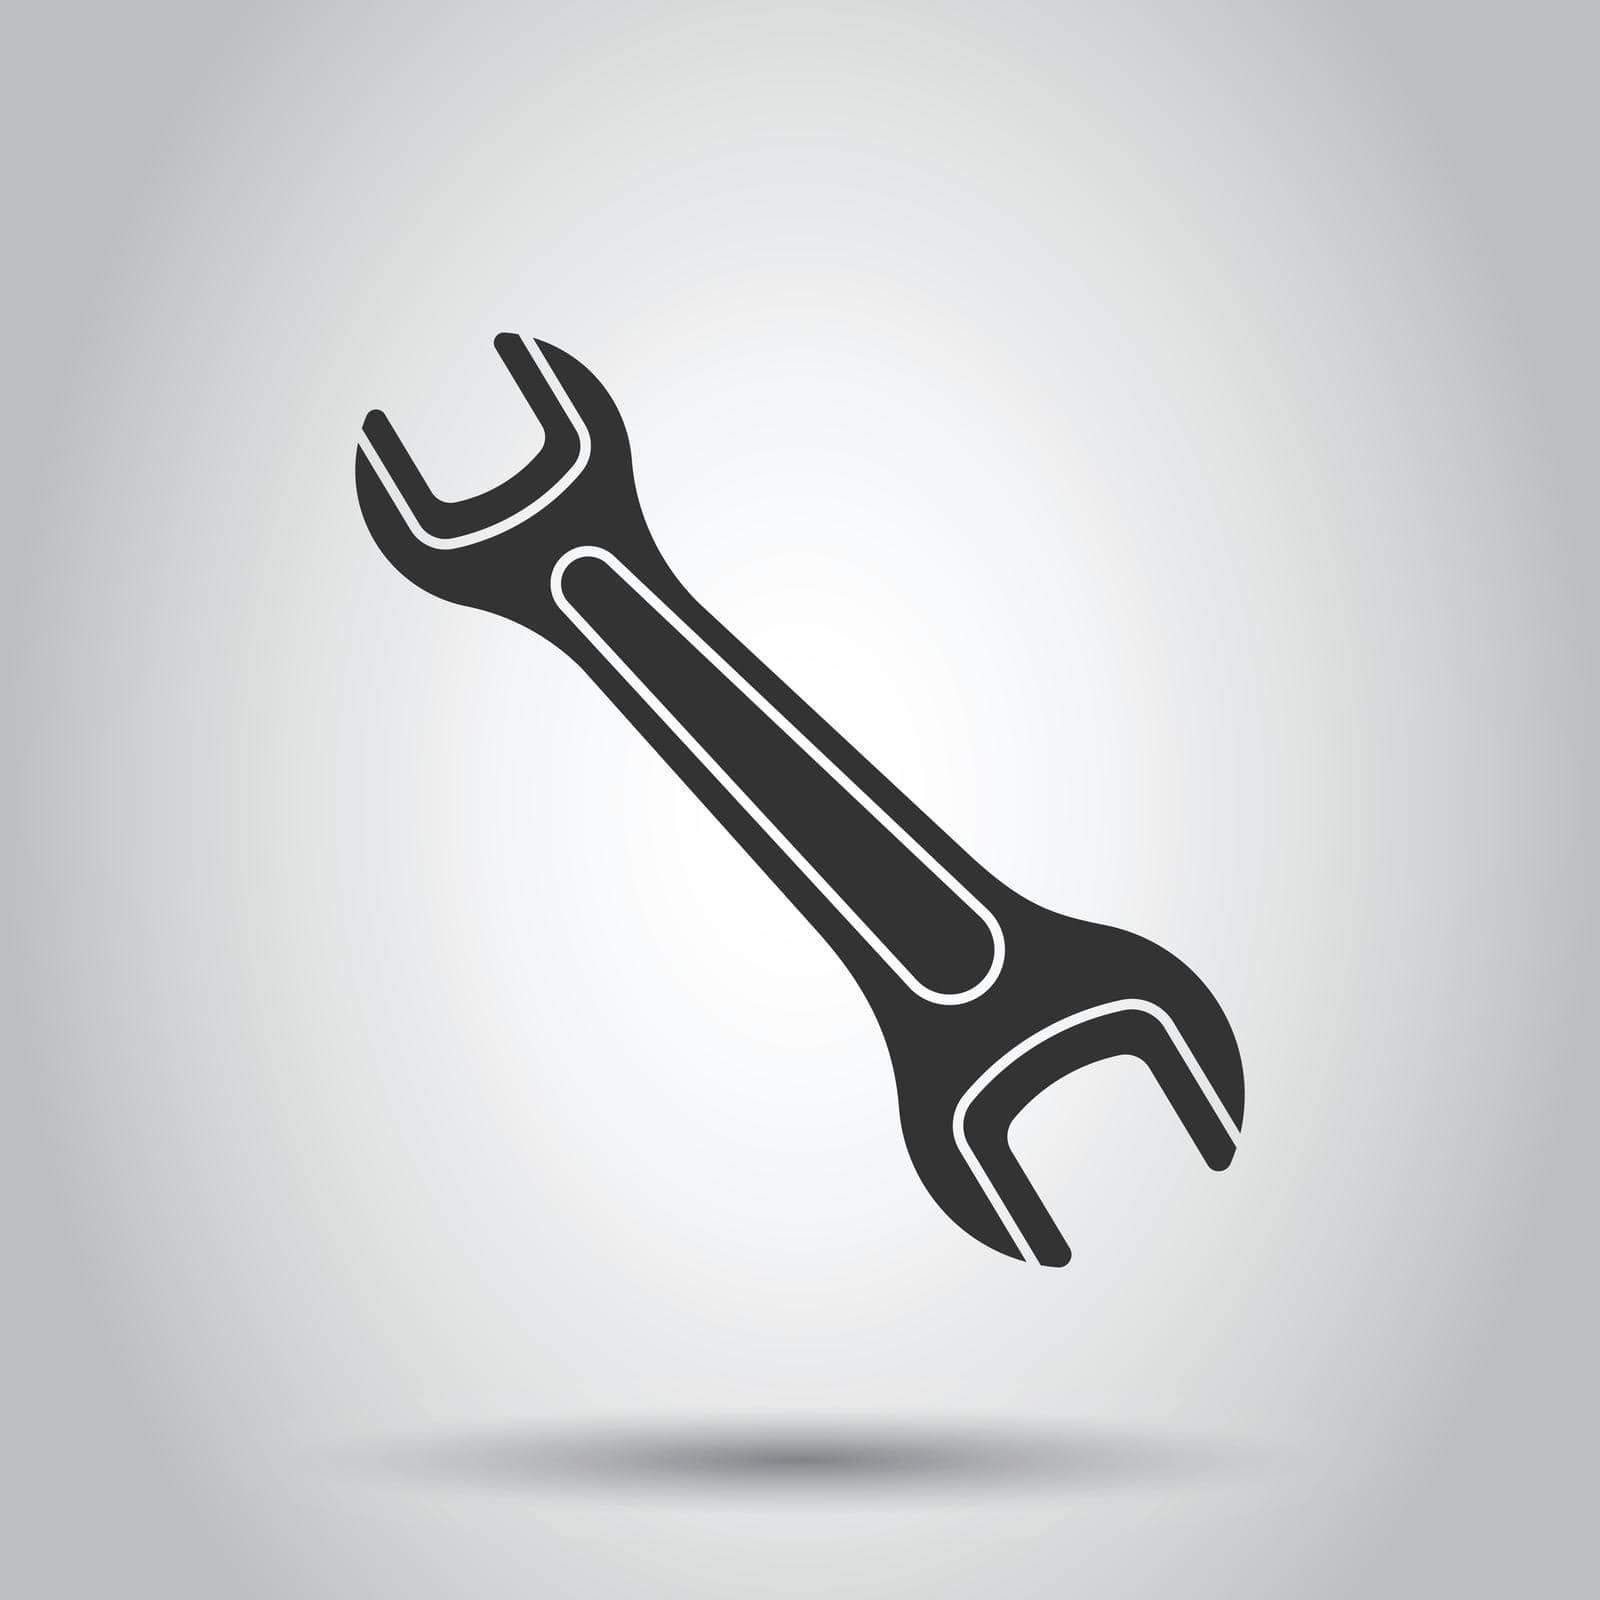 Wrench icon in flat style. Spanner key vector illustration on white isolated background. Repair equipment business concept. by LysenkoA